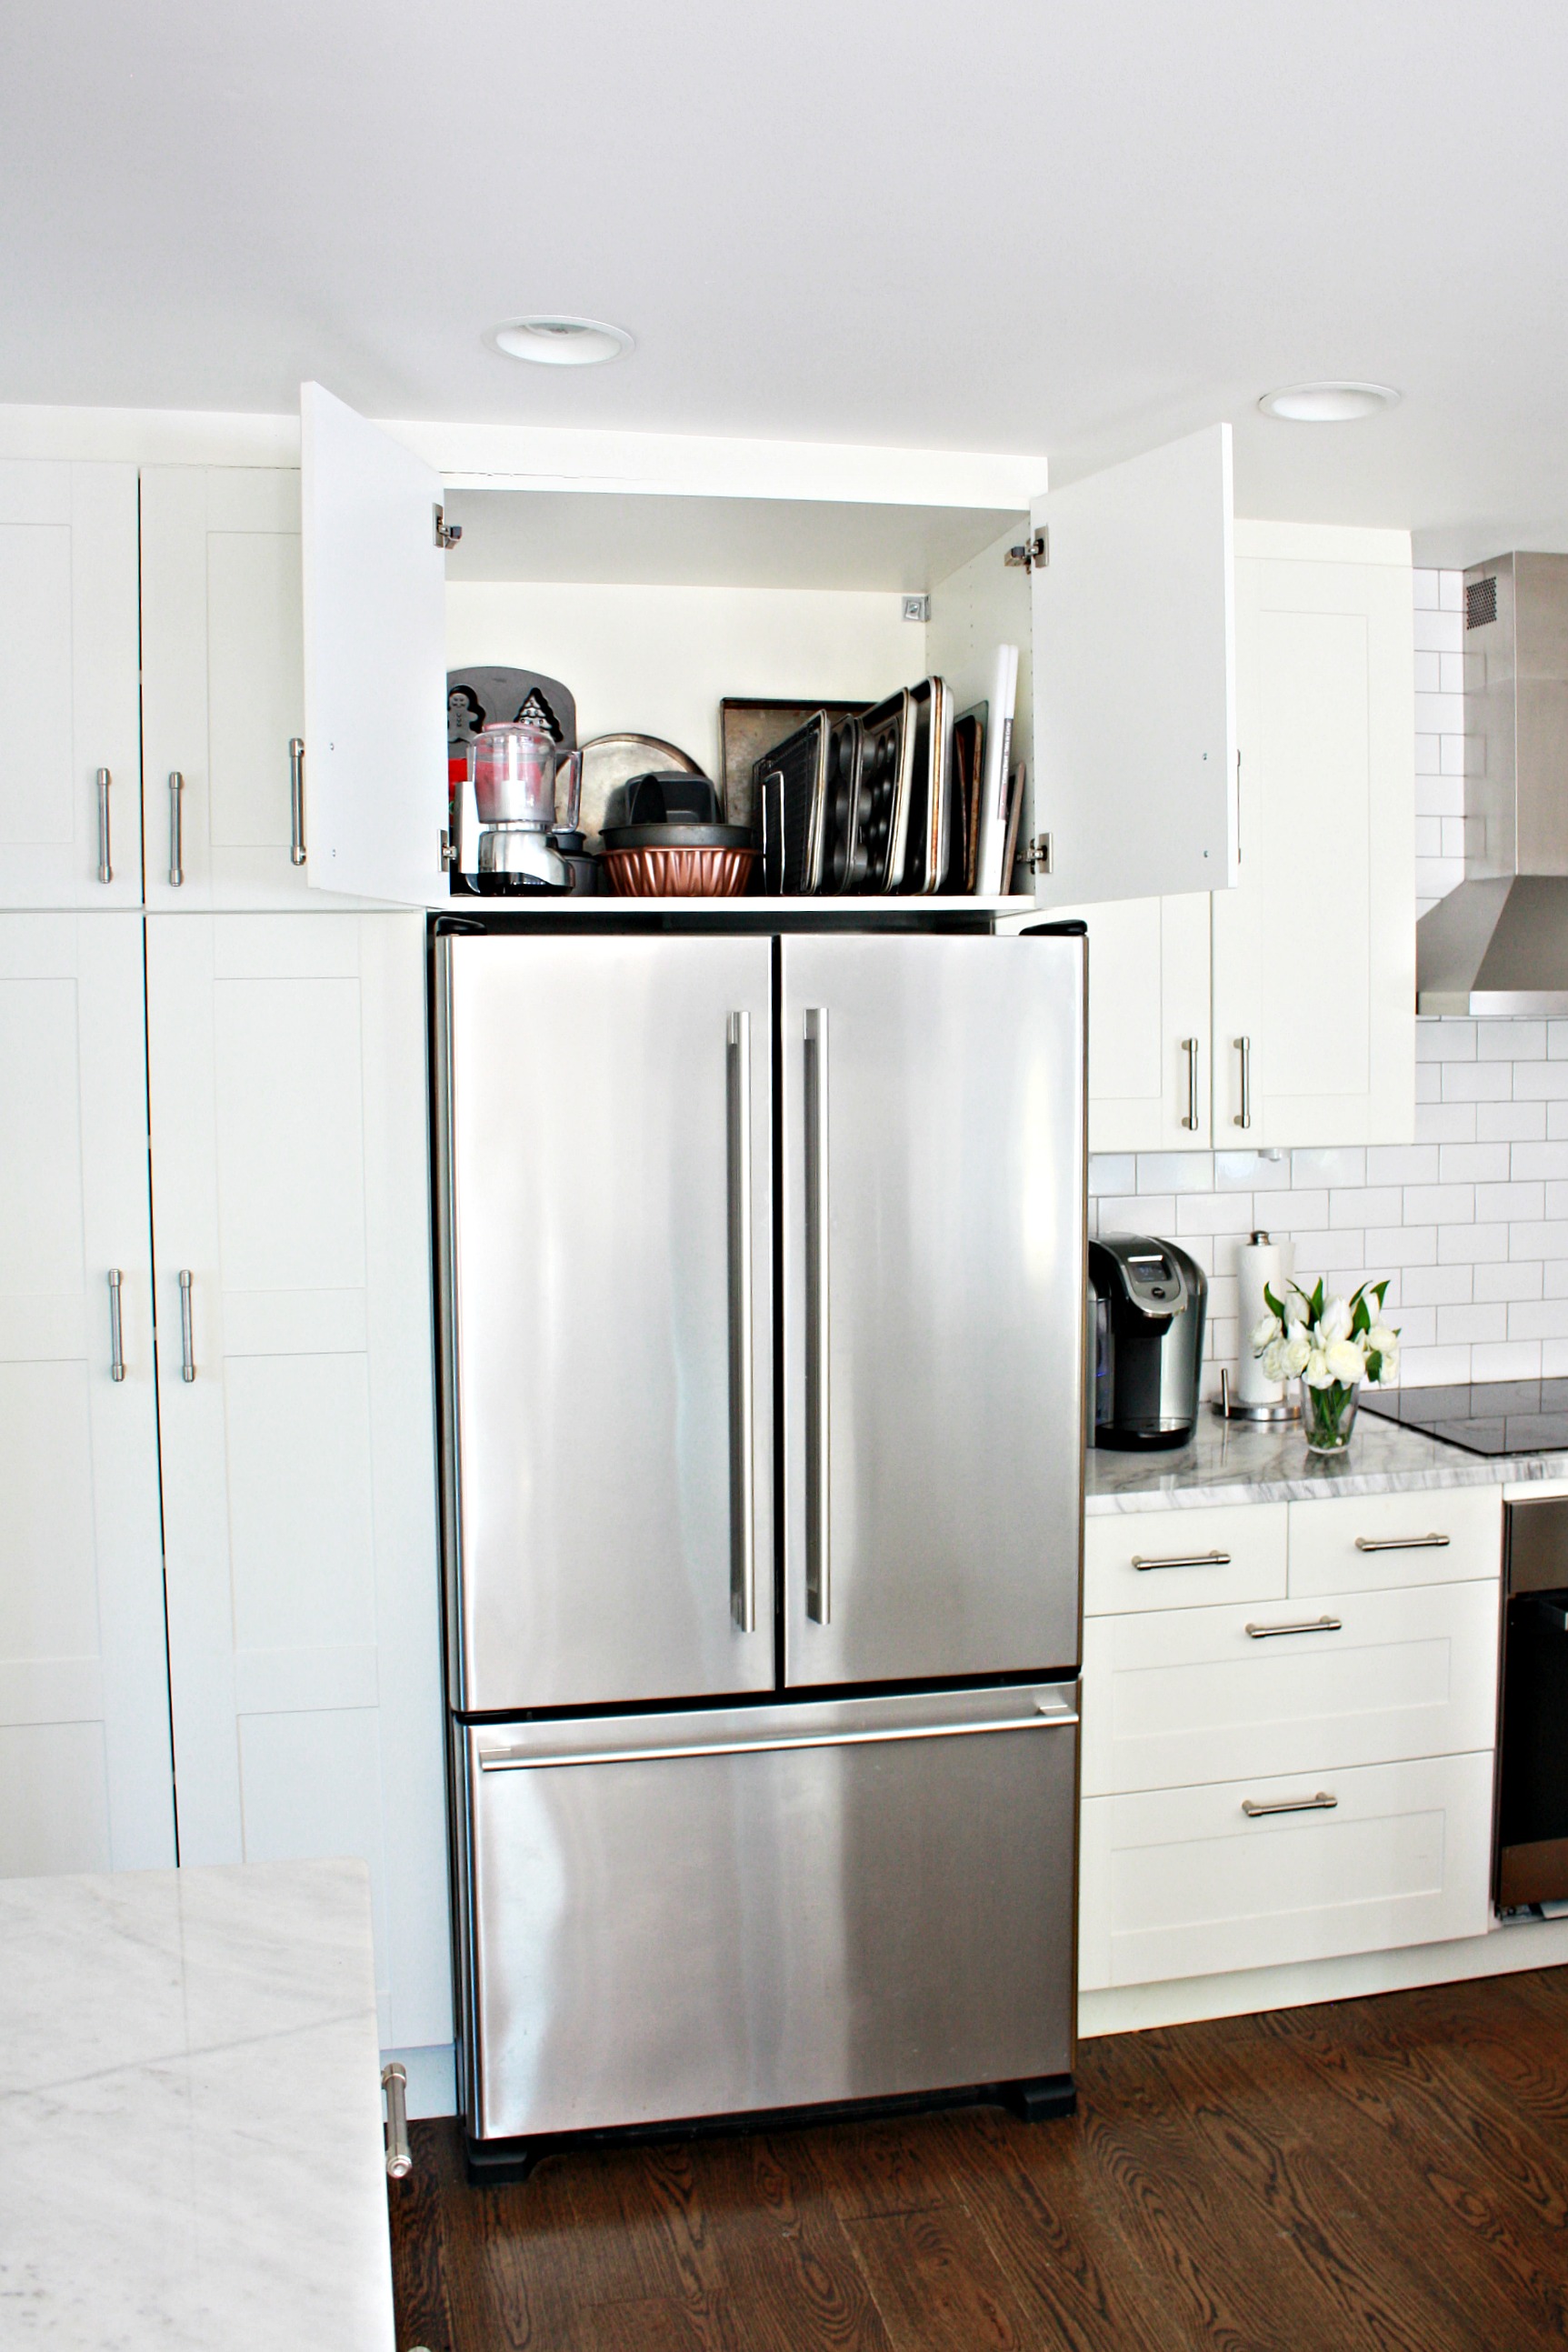 How to Organize Kitchen Cabinets - Clean and Scentsible